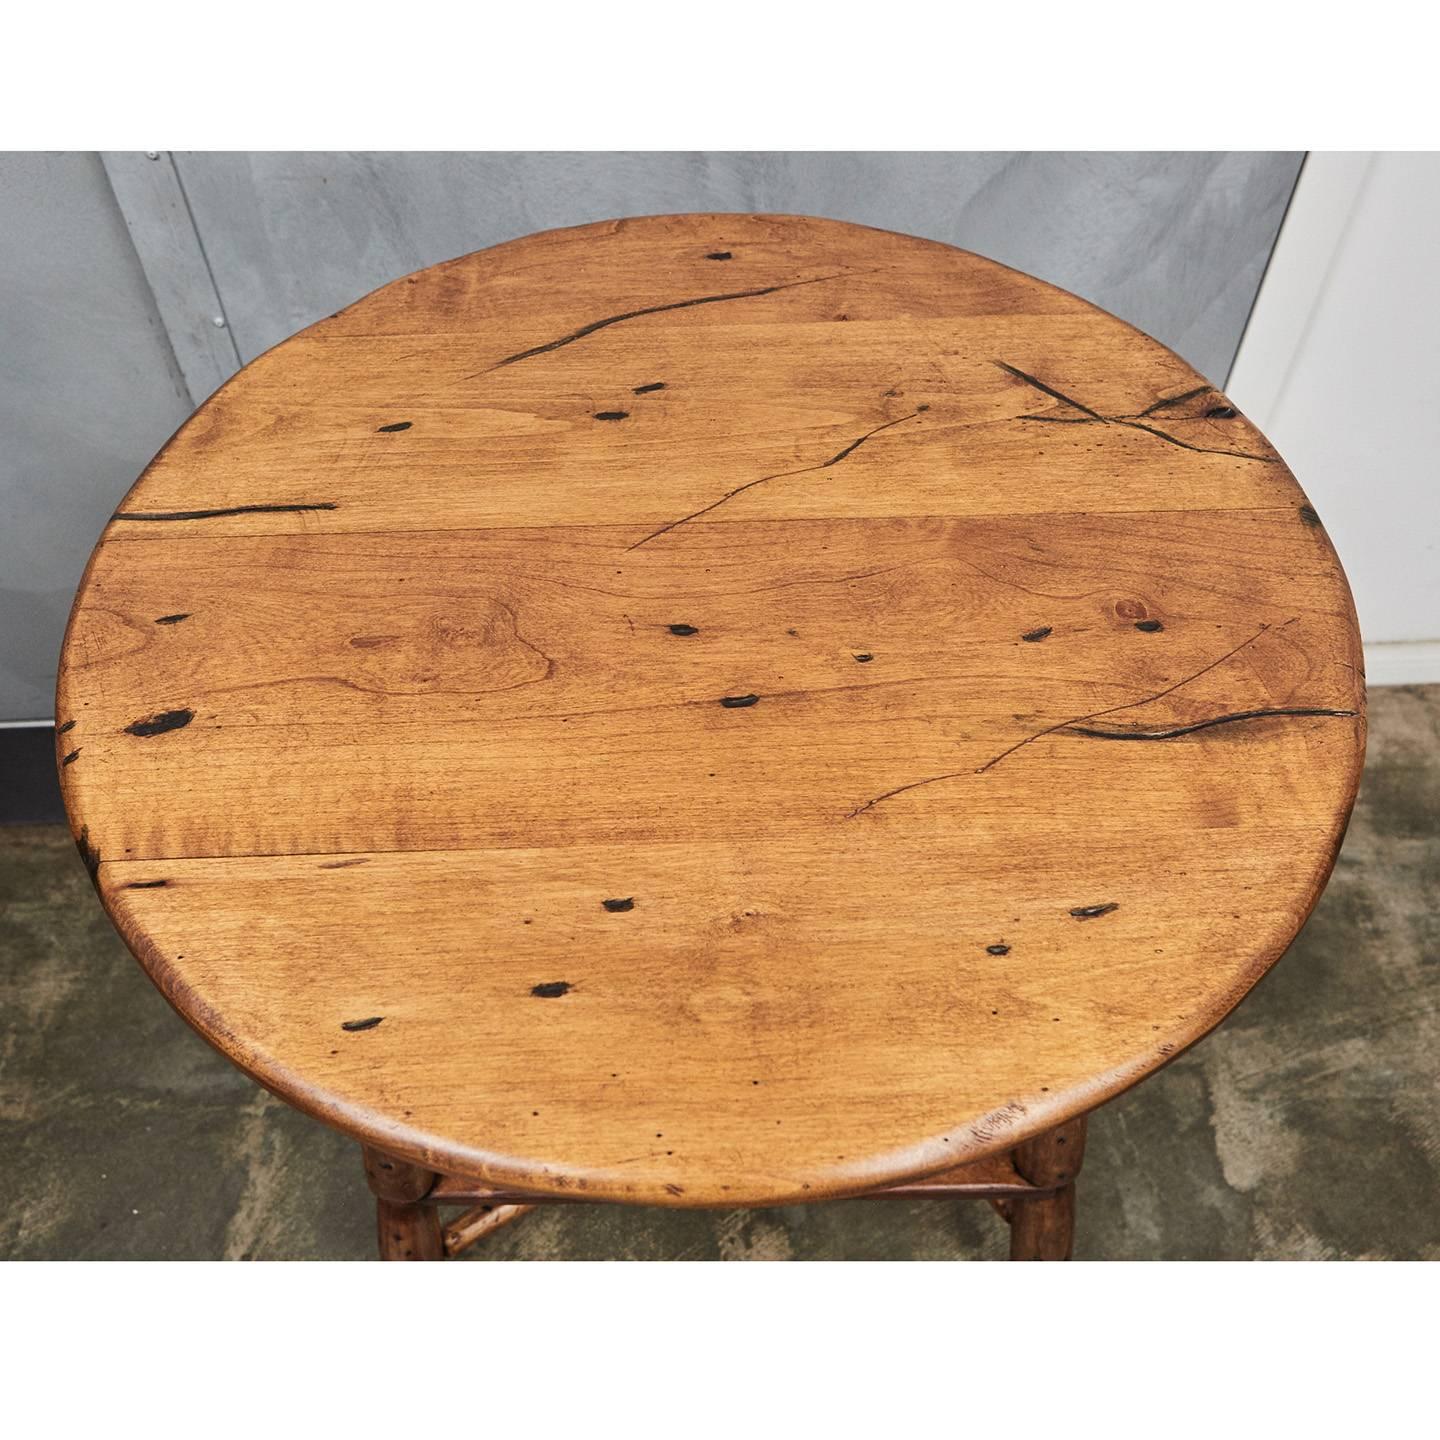 Jefferson West Cricket Table In Good Condition For Sale In Culver City, CA